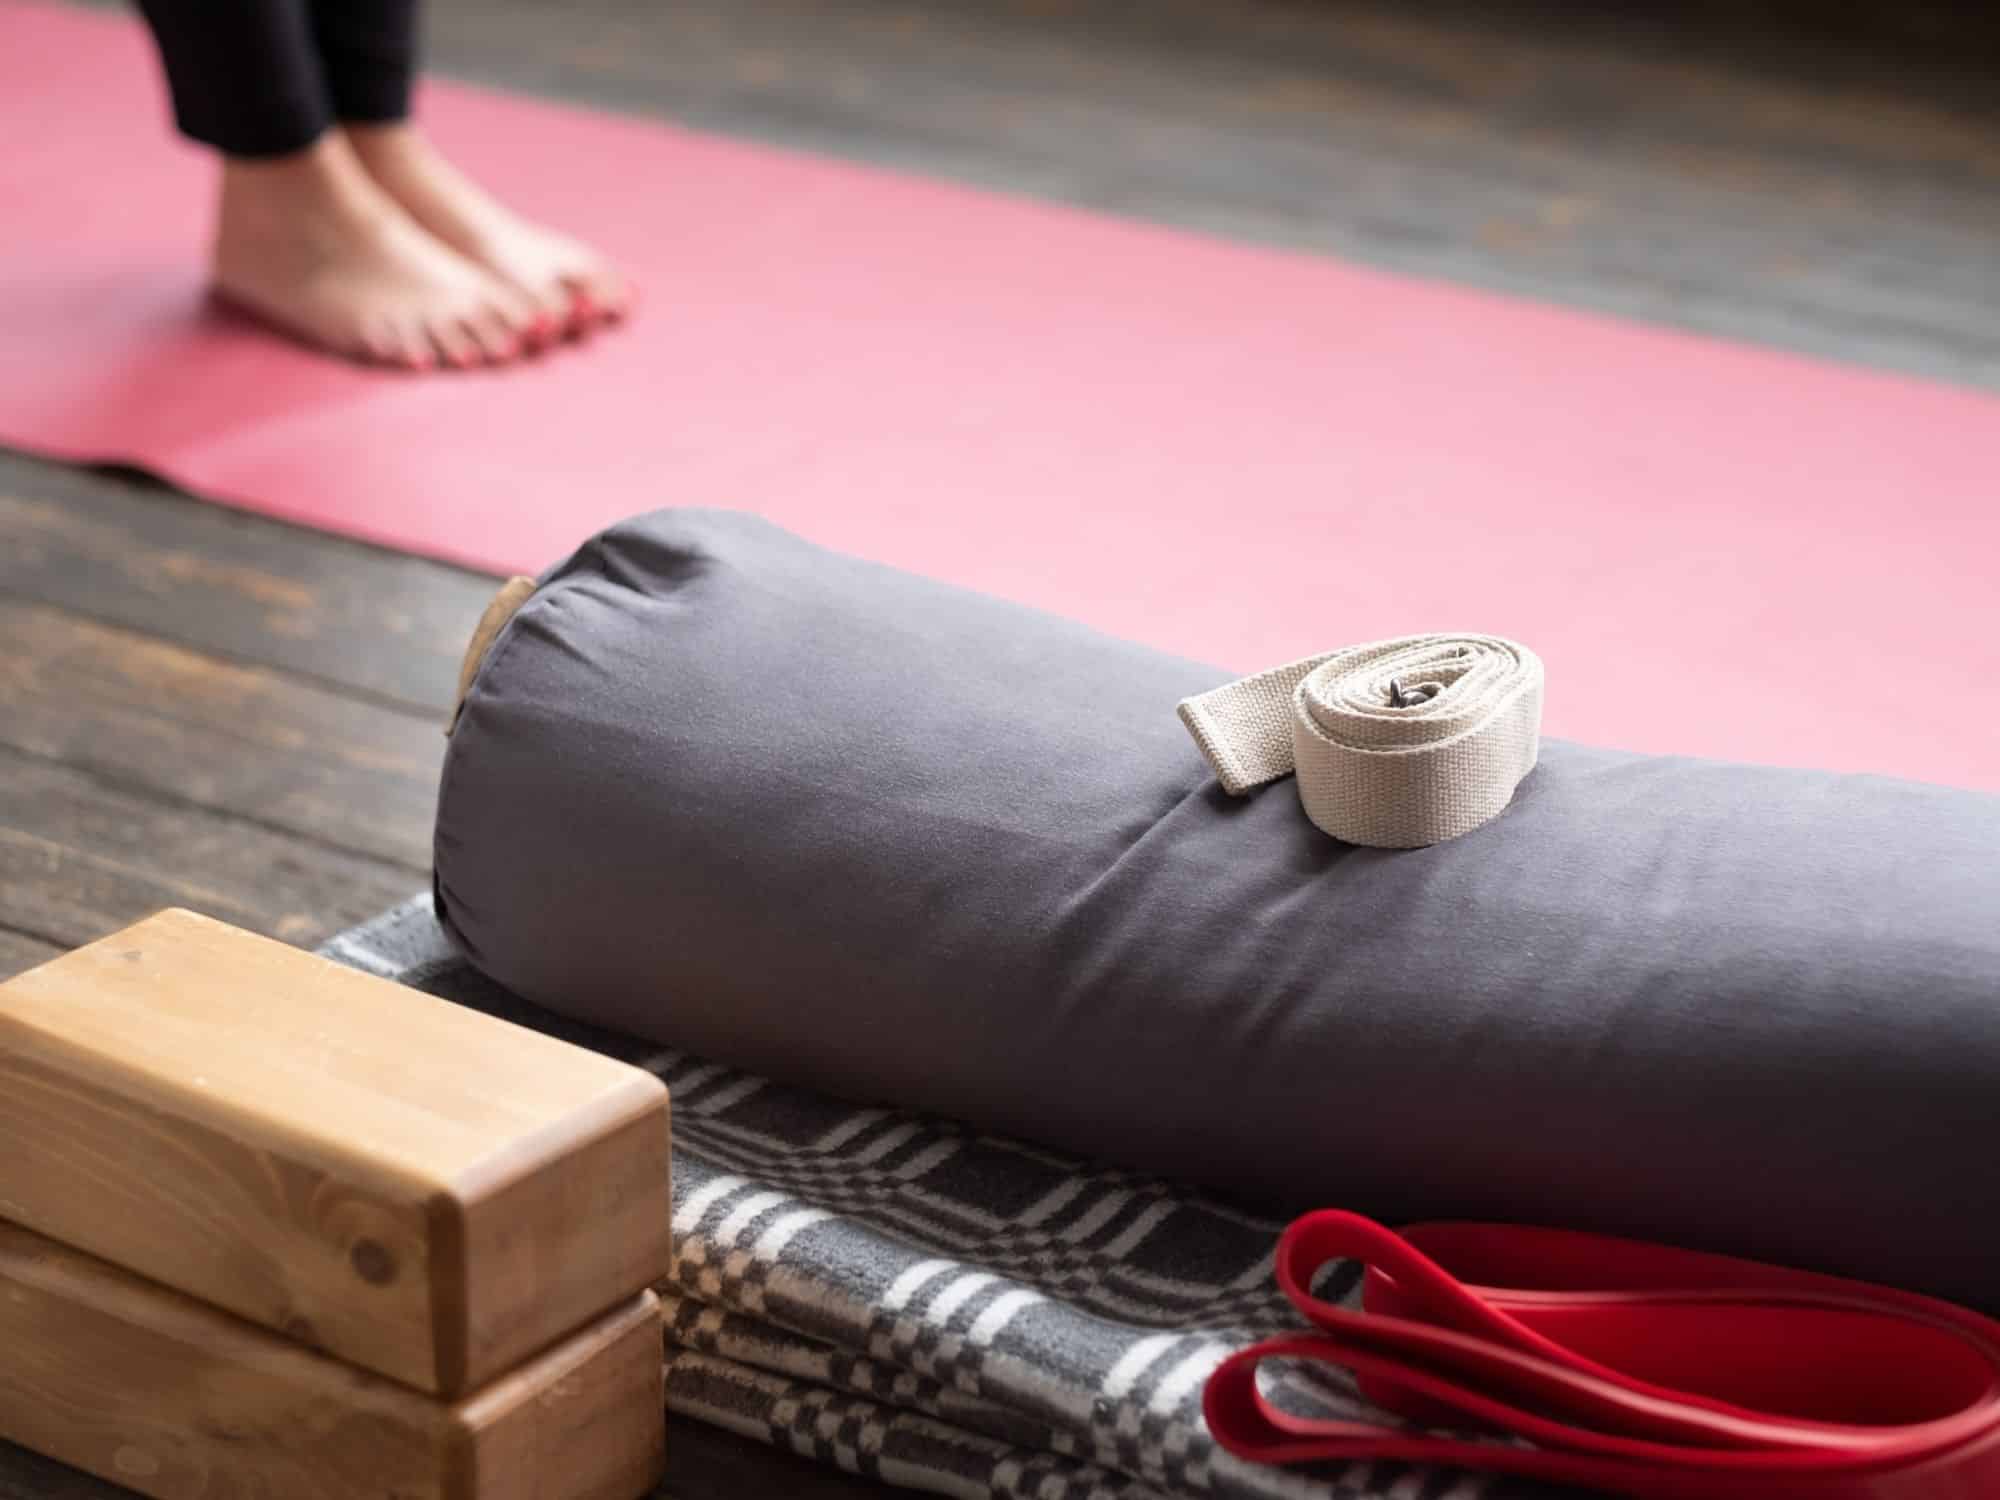 Traveling With A Yoga Mat (All You Need To Know)